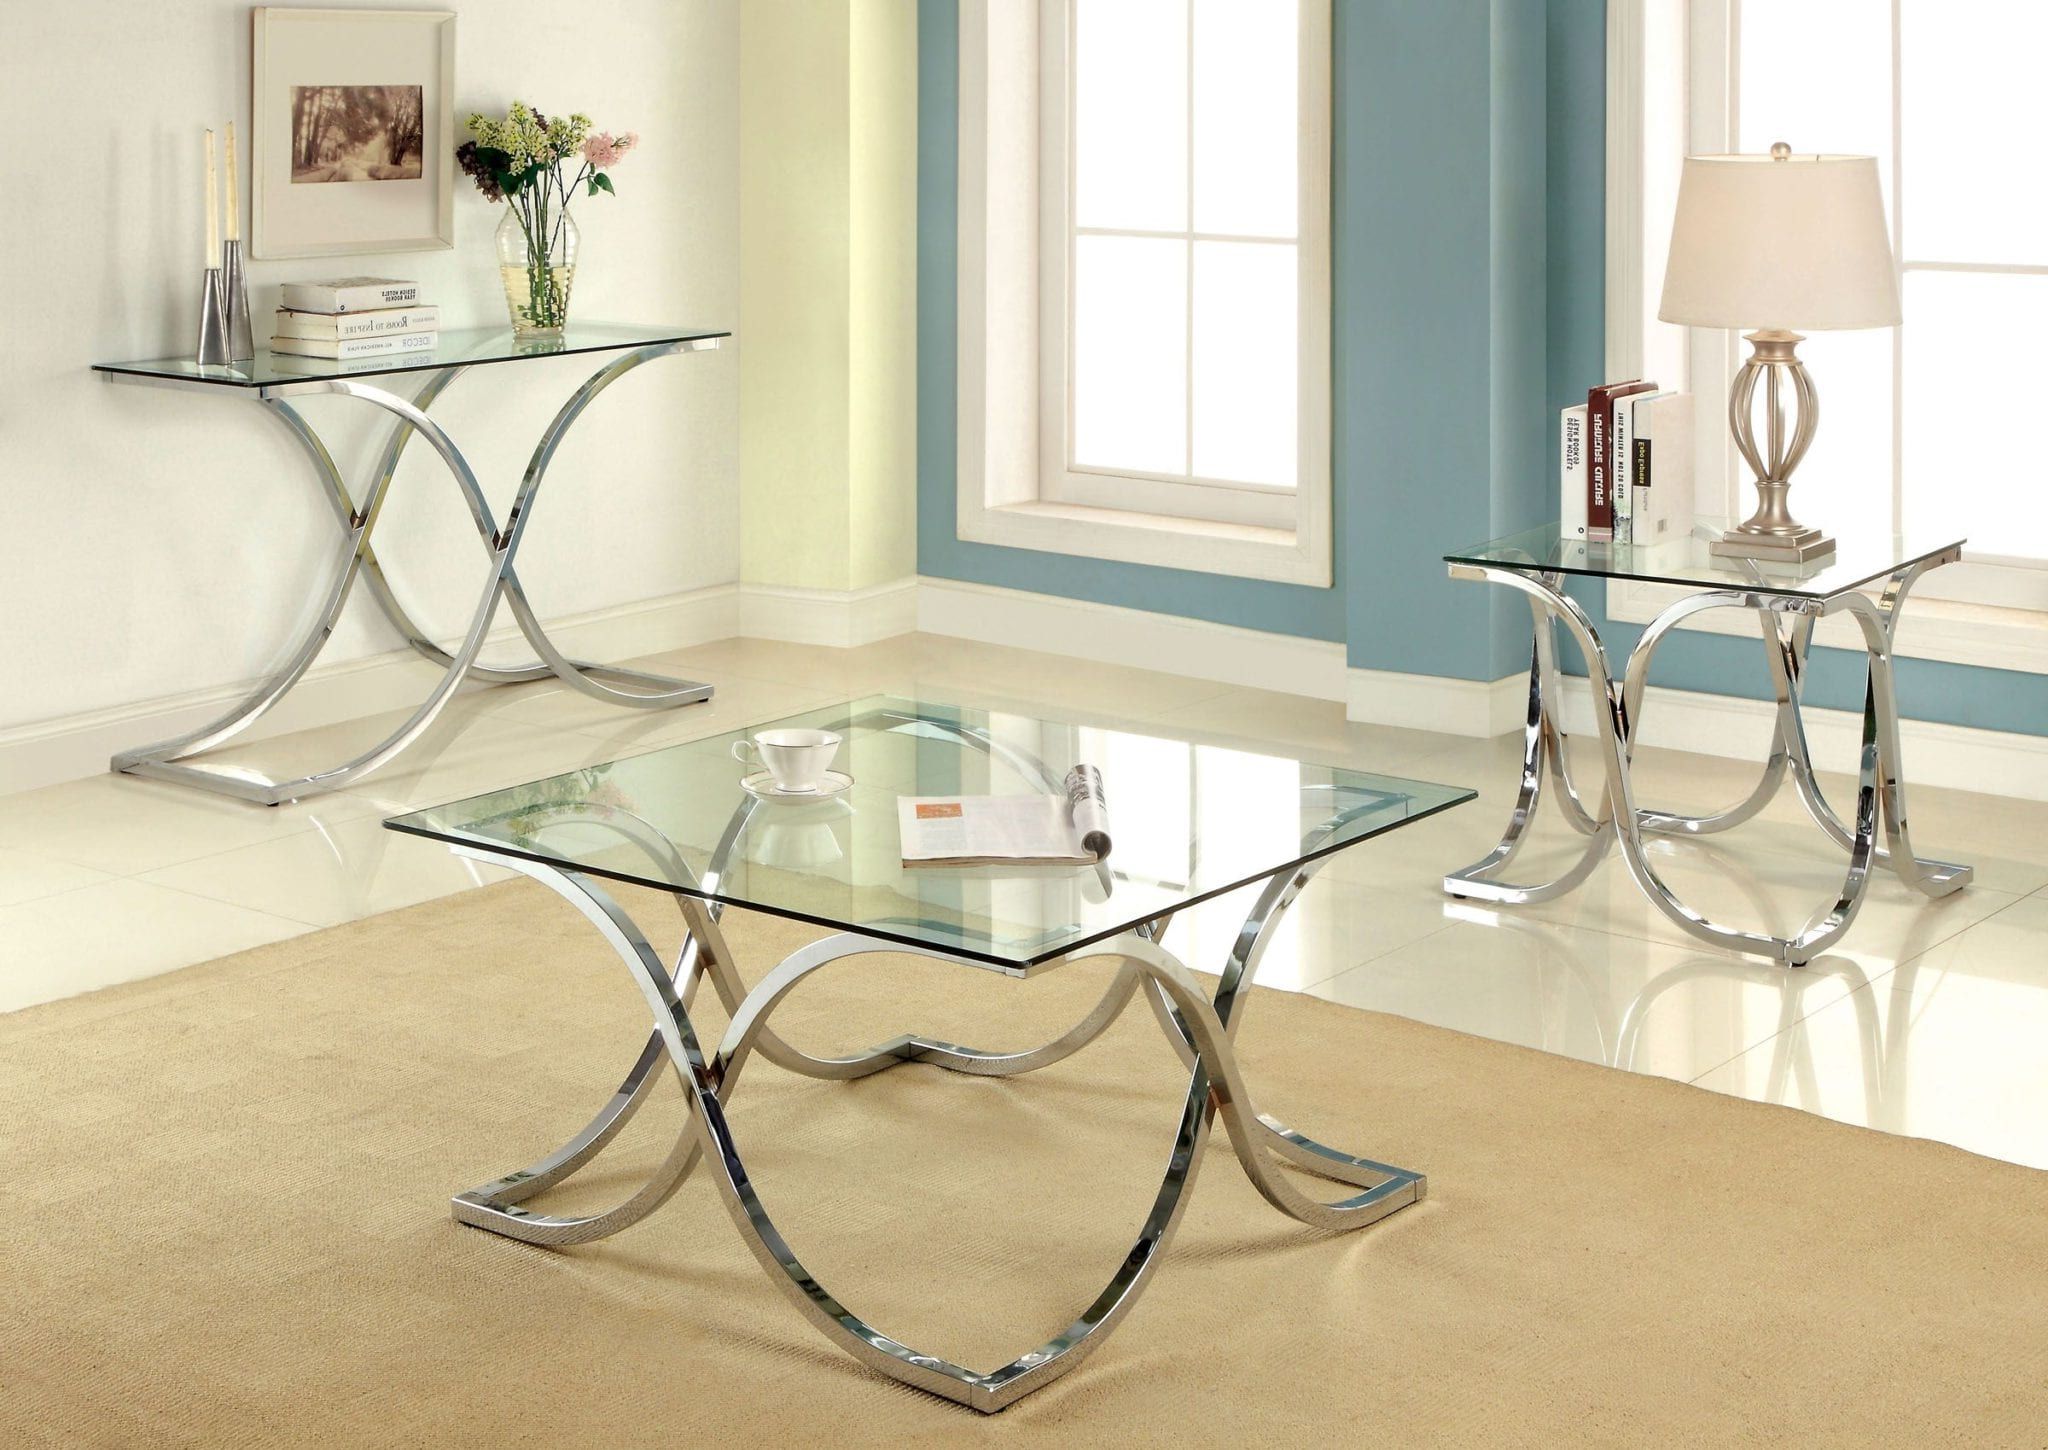 Widely Used Mirrored And Chrome Modern Cocktail Tables Throughout Cm4233 3 Pieces Contemporary Chrome Mirror Top Coffee (View 9 of 20)